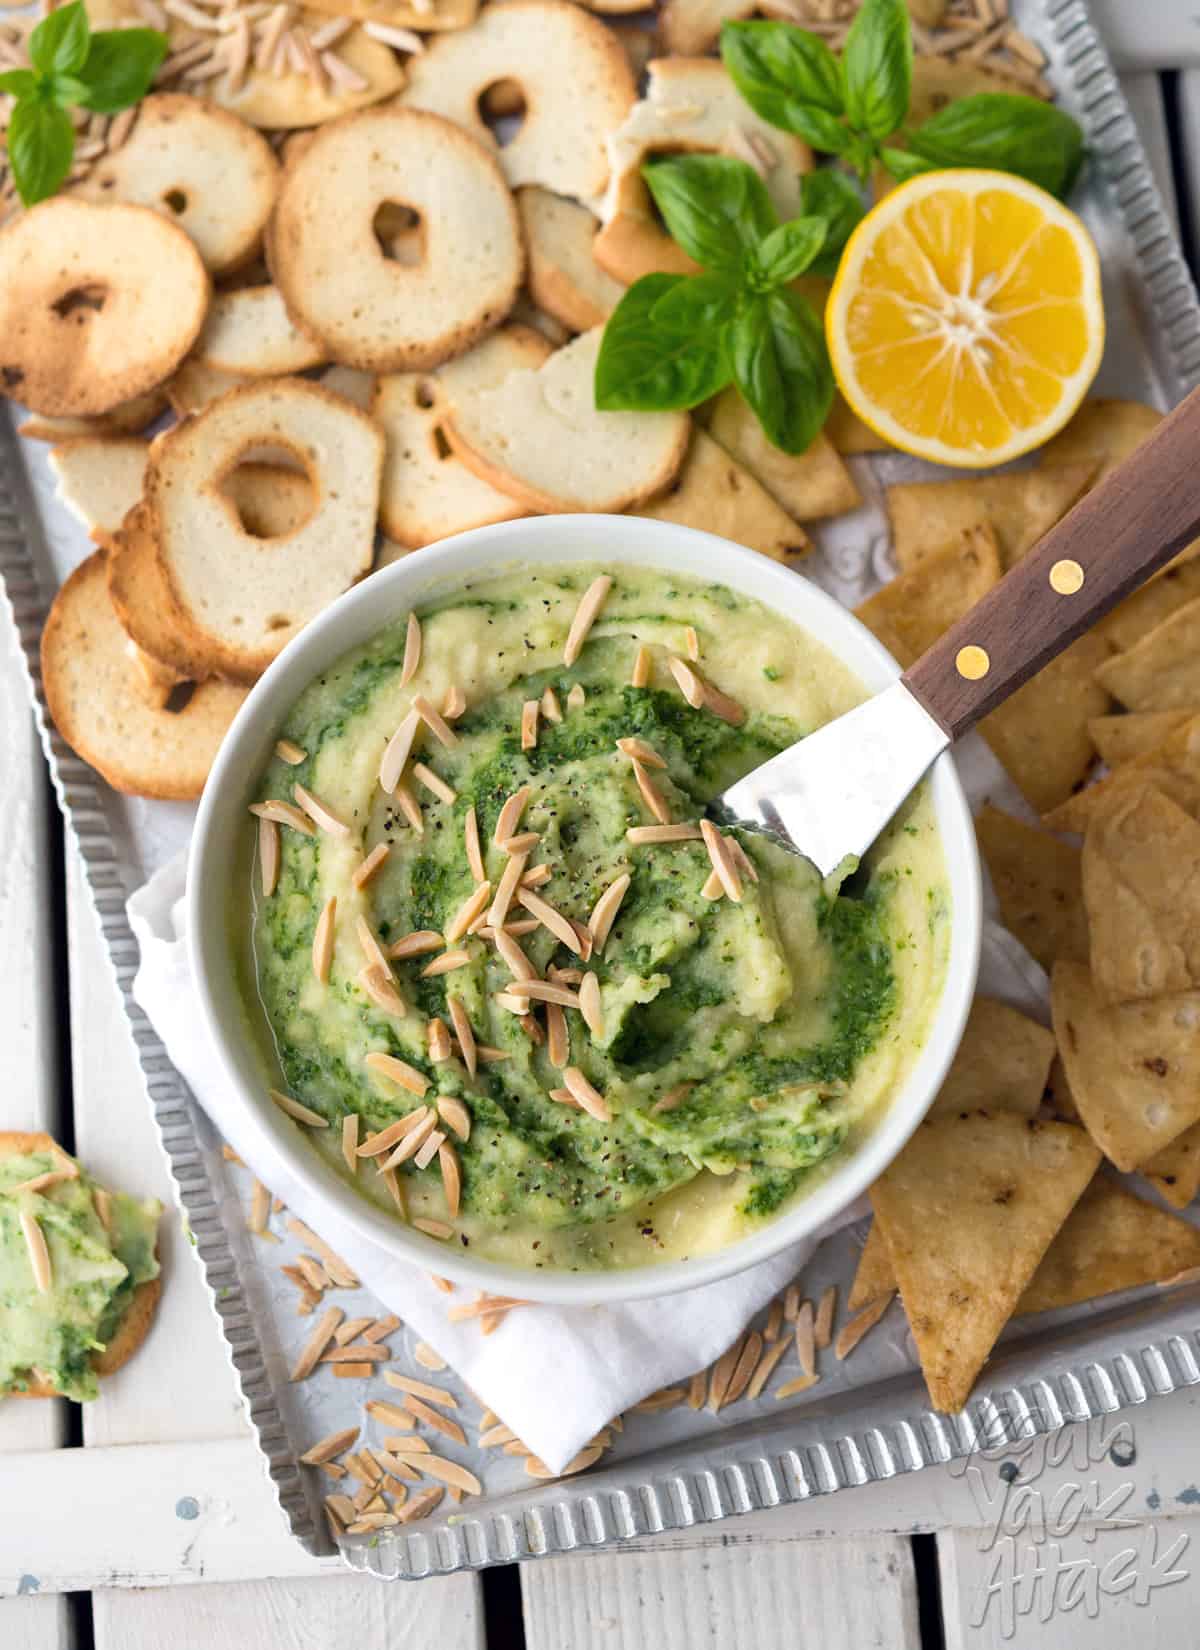 This Creamy Cauliflower Pesto Dip is oil-free, dairy-free, vegan and delicious! It makes for a great, healthy appetizer for parties, or just to snack on.